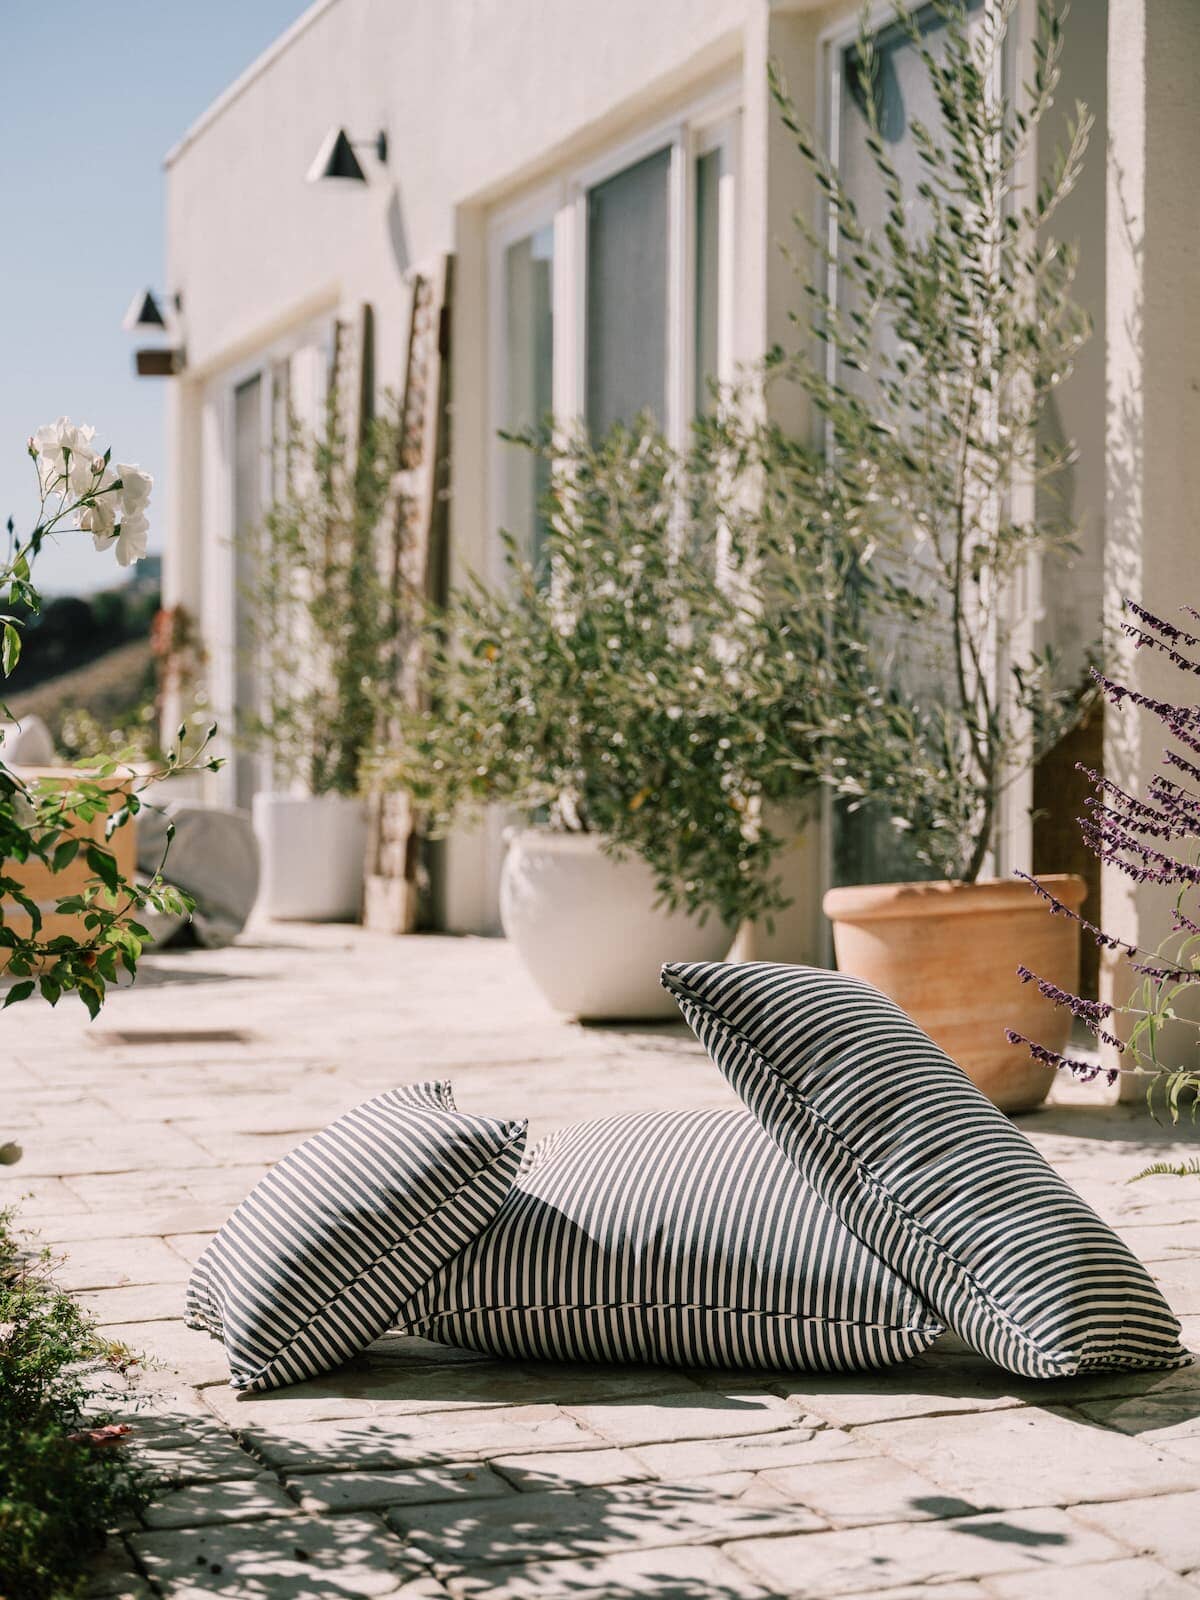 3 outdoor cushions resting on the ground on a patio